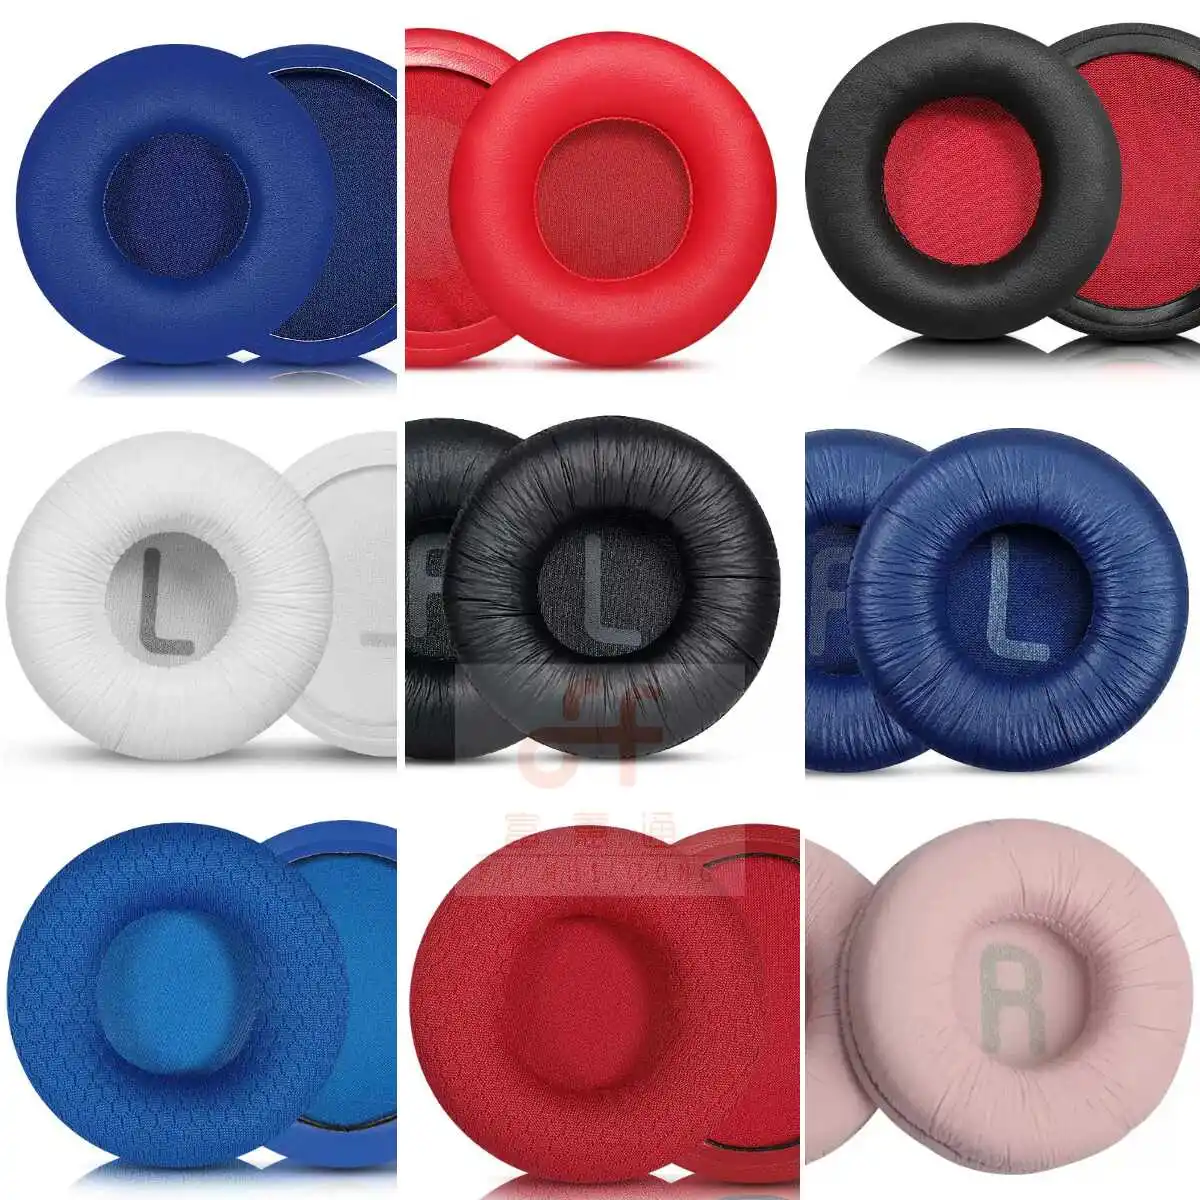 

Replacement EarPads Cushion For SONY MDR ZX 100 110 220 300 310 330 BT Headphones Headset